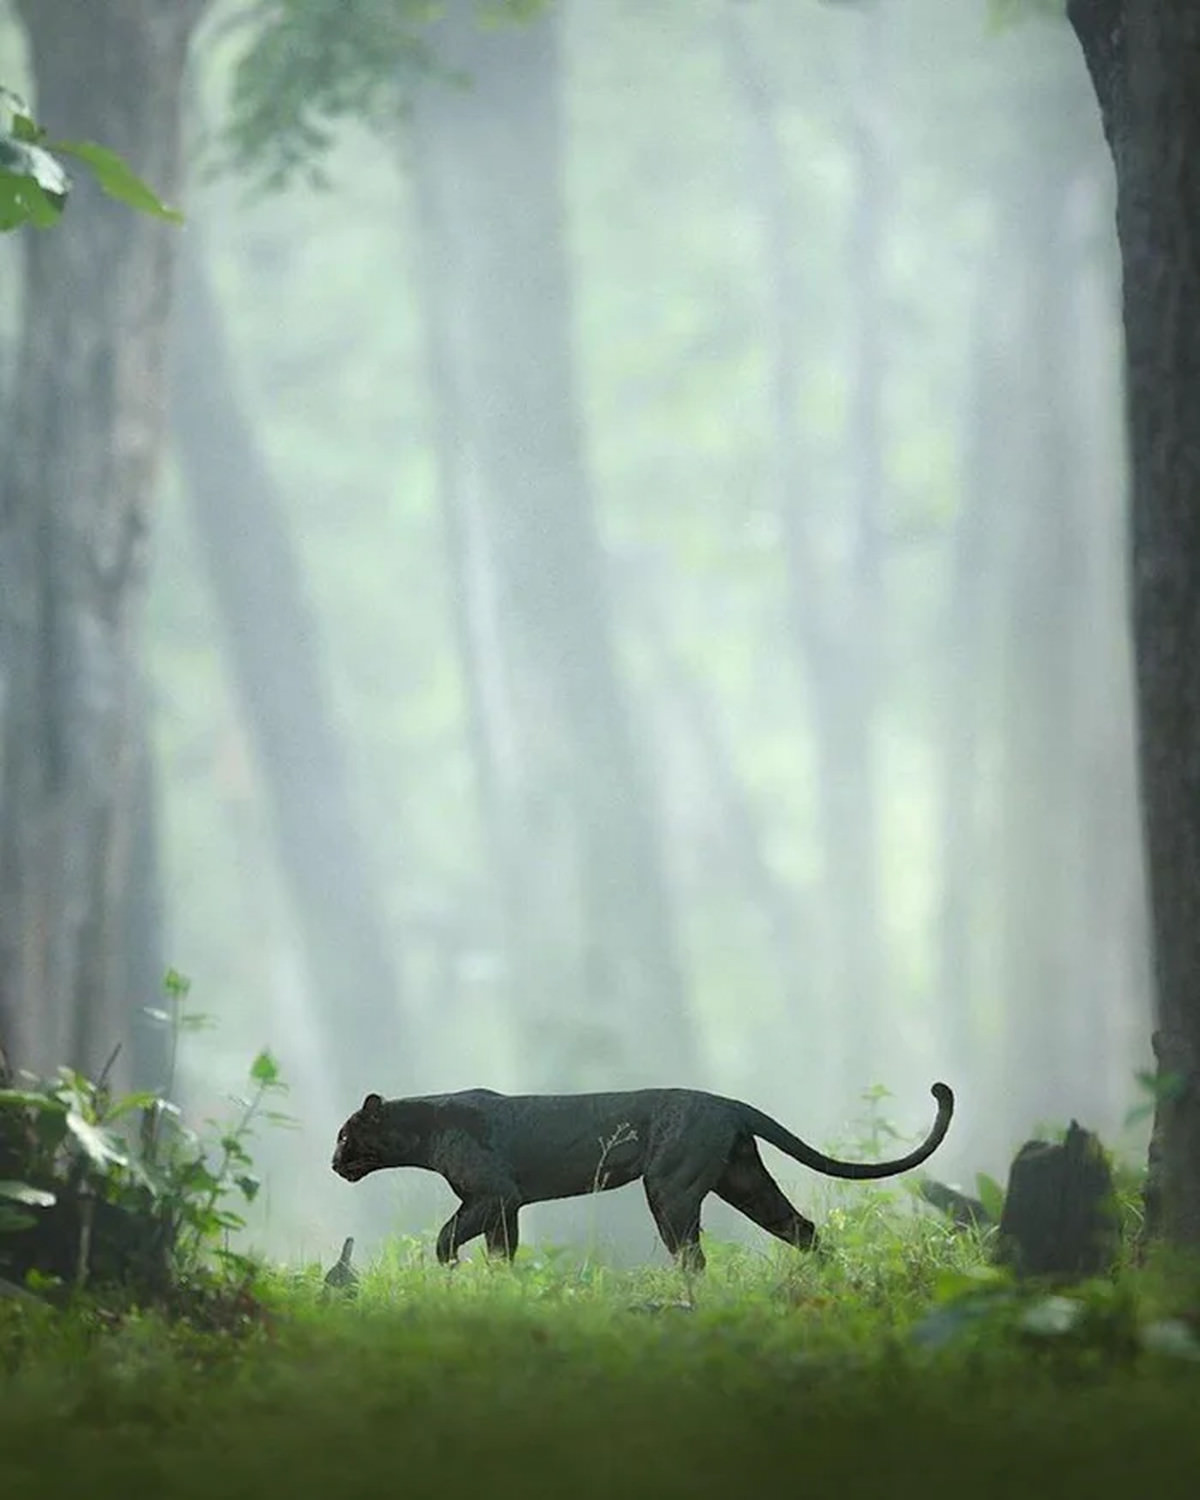 A rare black panther roaming in the forest / Shaz Jag